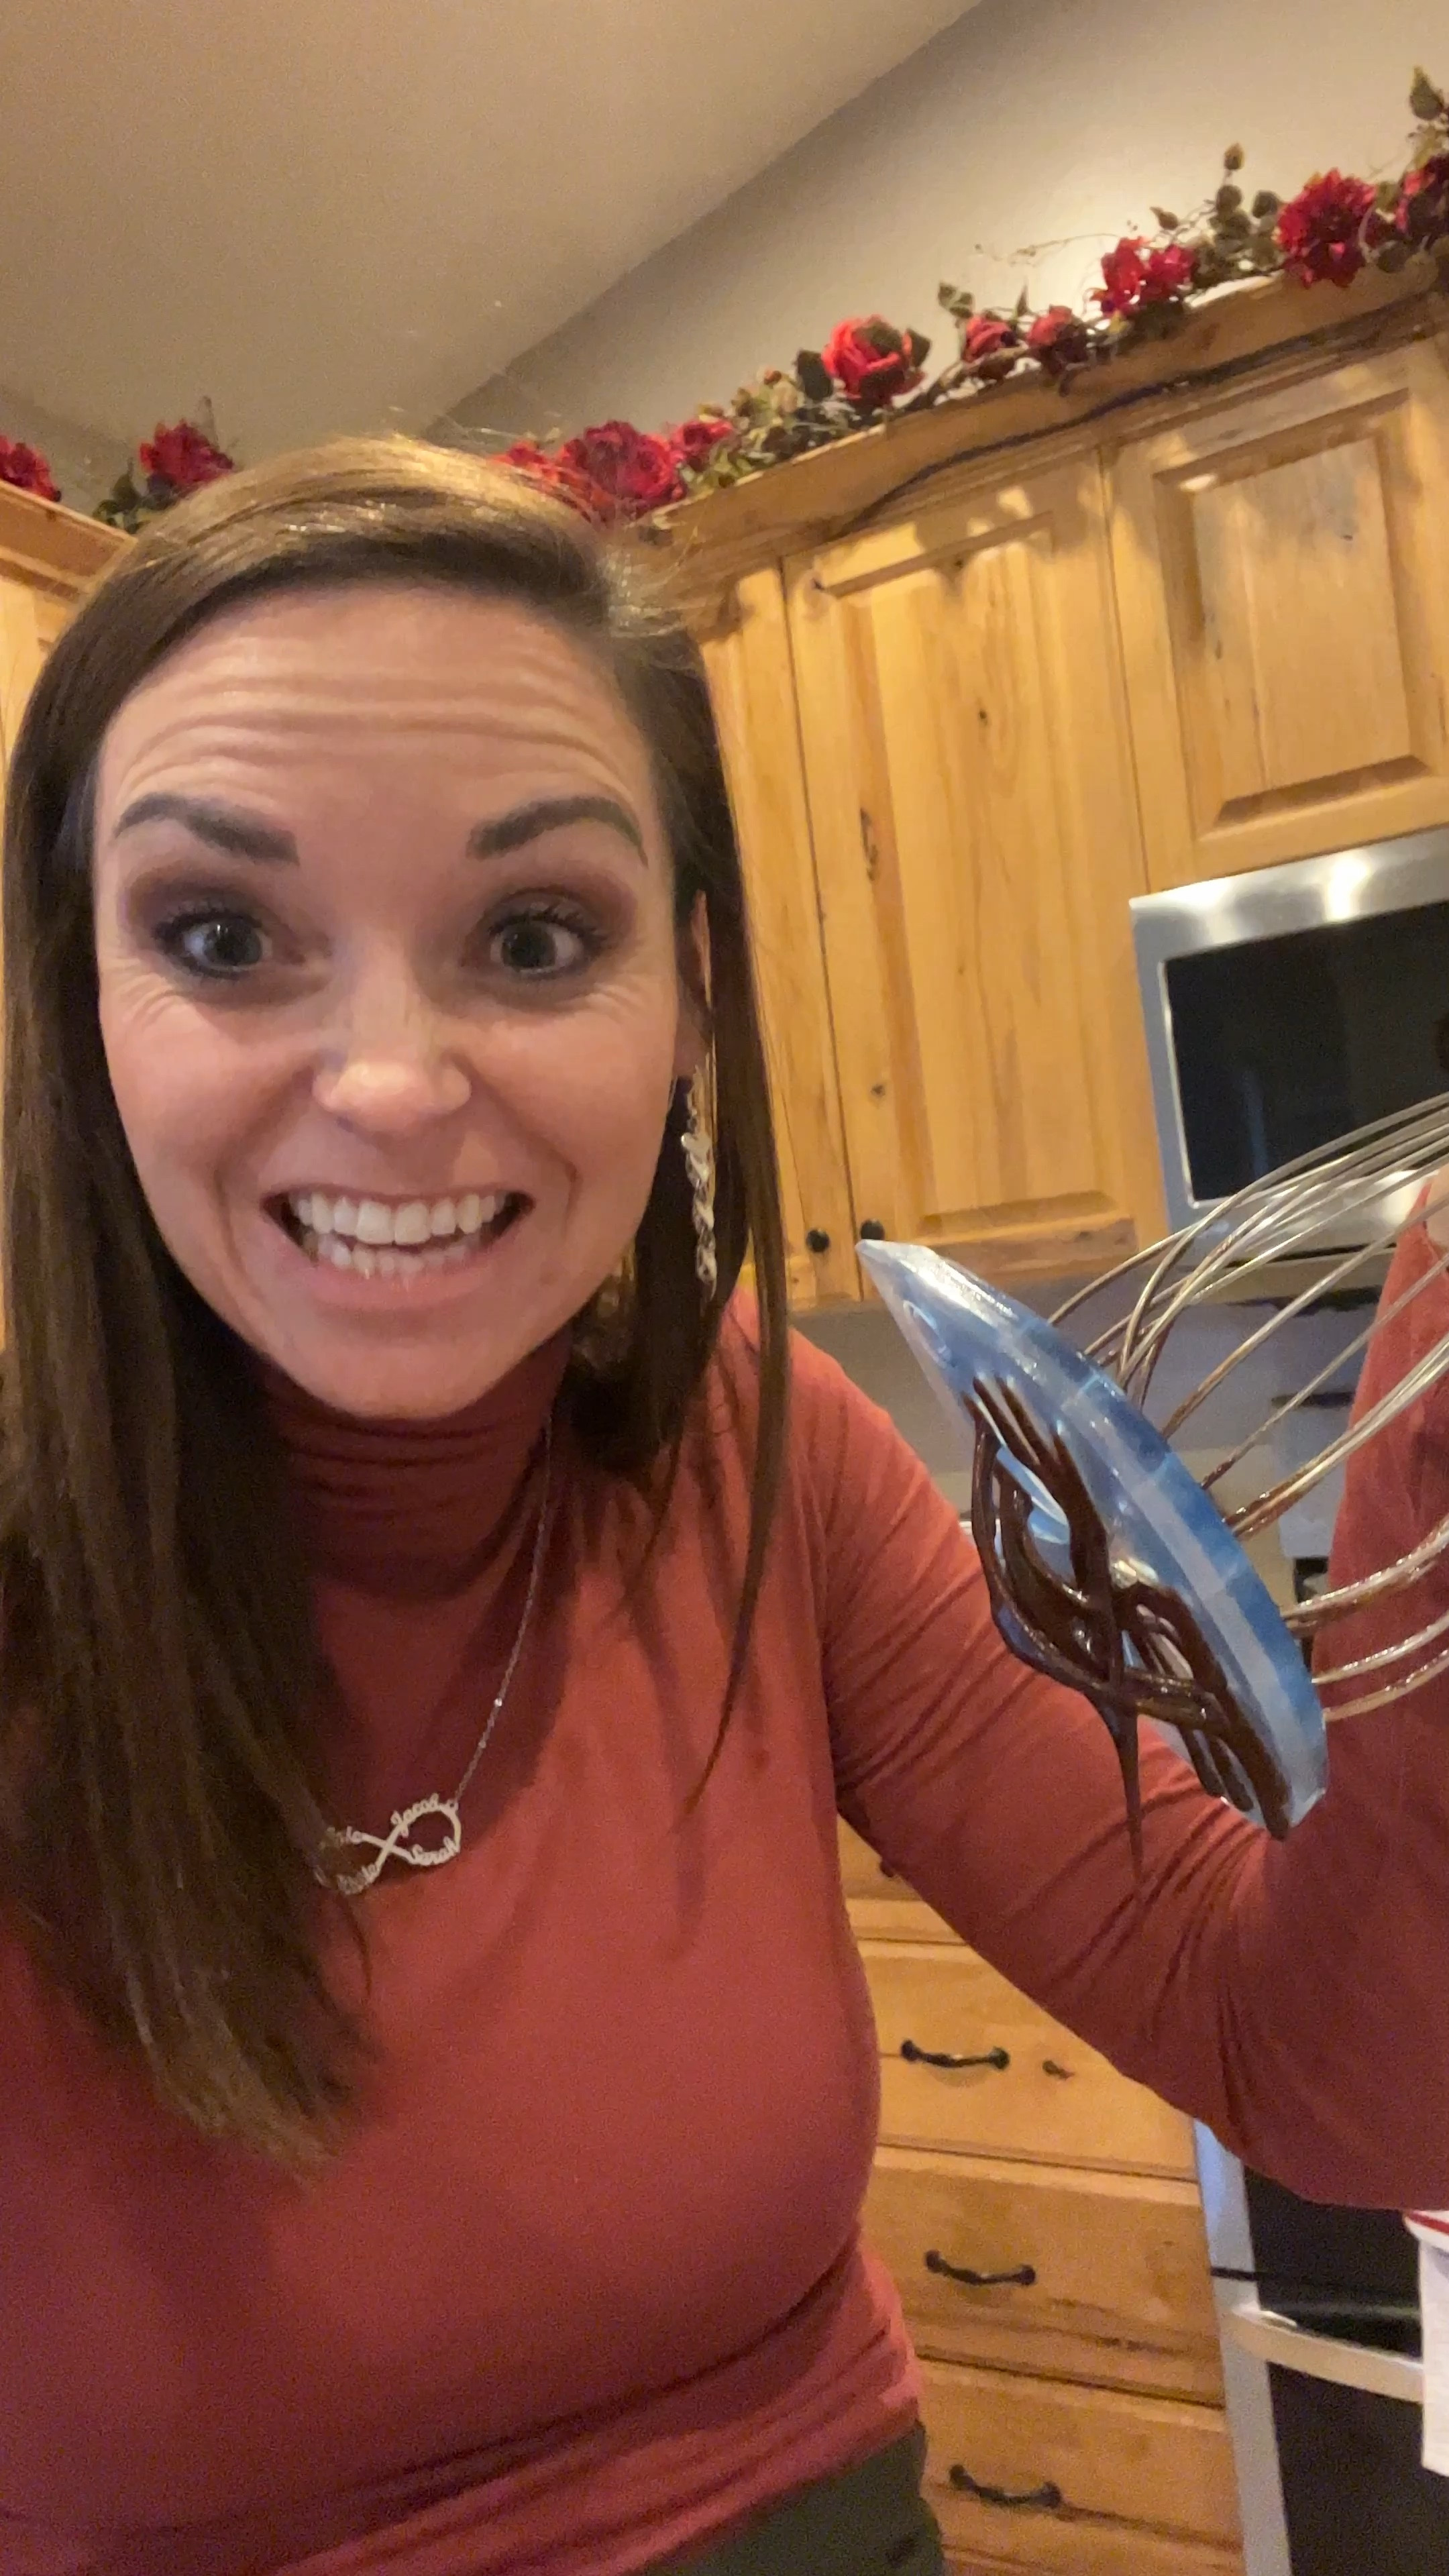 Whisk Wiper Video - Does Whisk Wiper Actually Work 